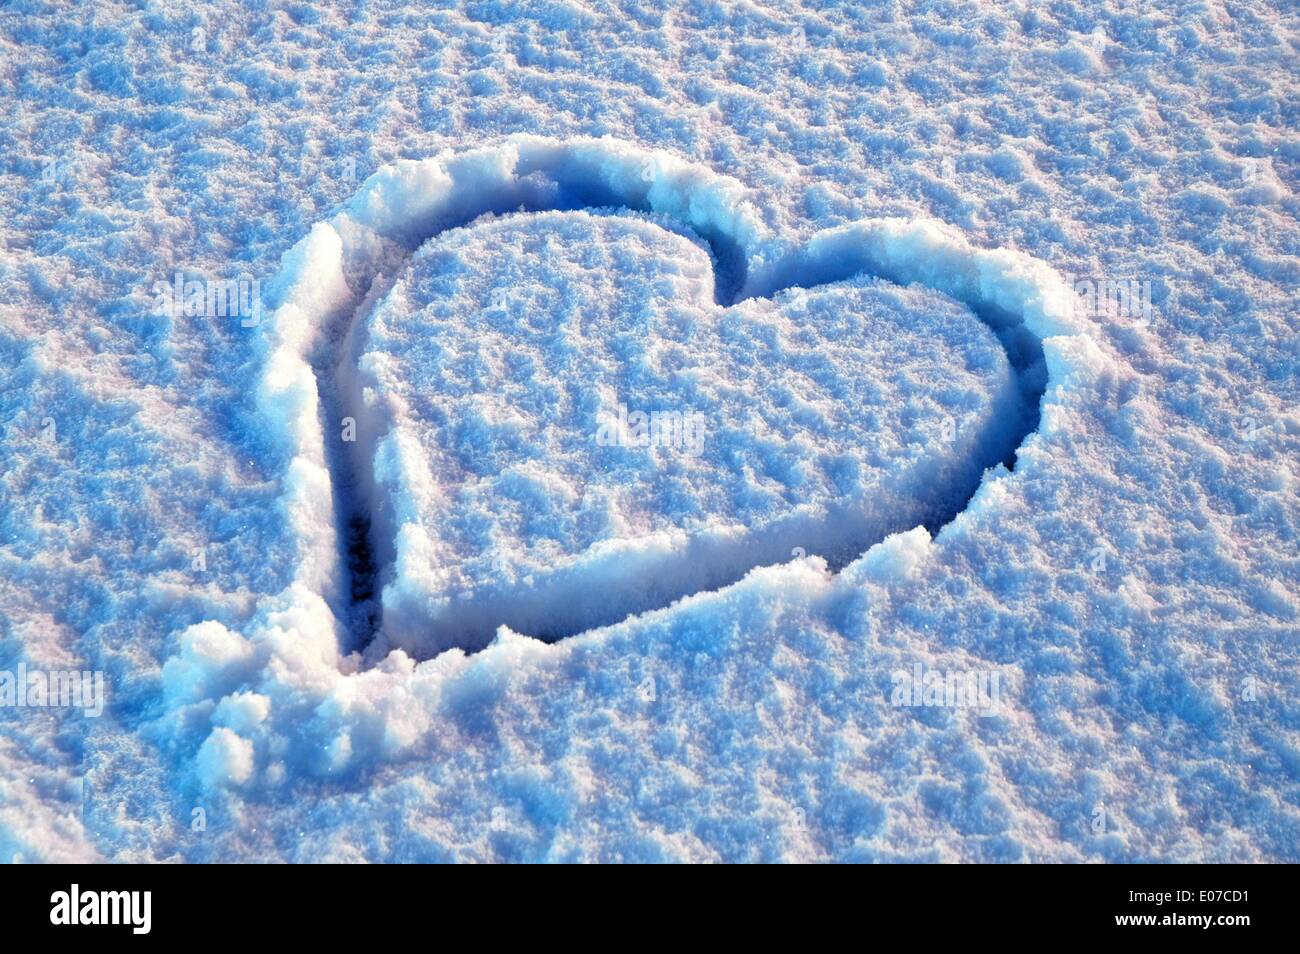 Illustration - A heart is painted in snow in Germany, 28 December 2005. Photo: Berliner Verlag/Steinach - NO WIRE SERVICE Stock Photo